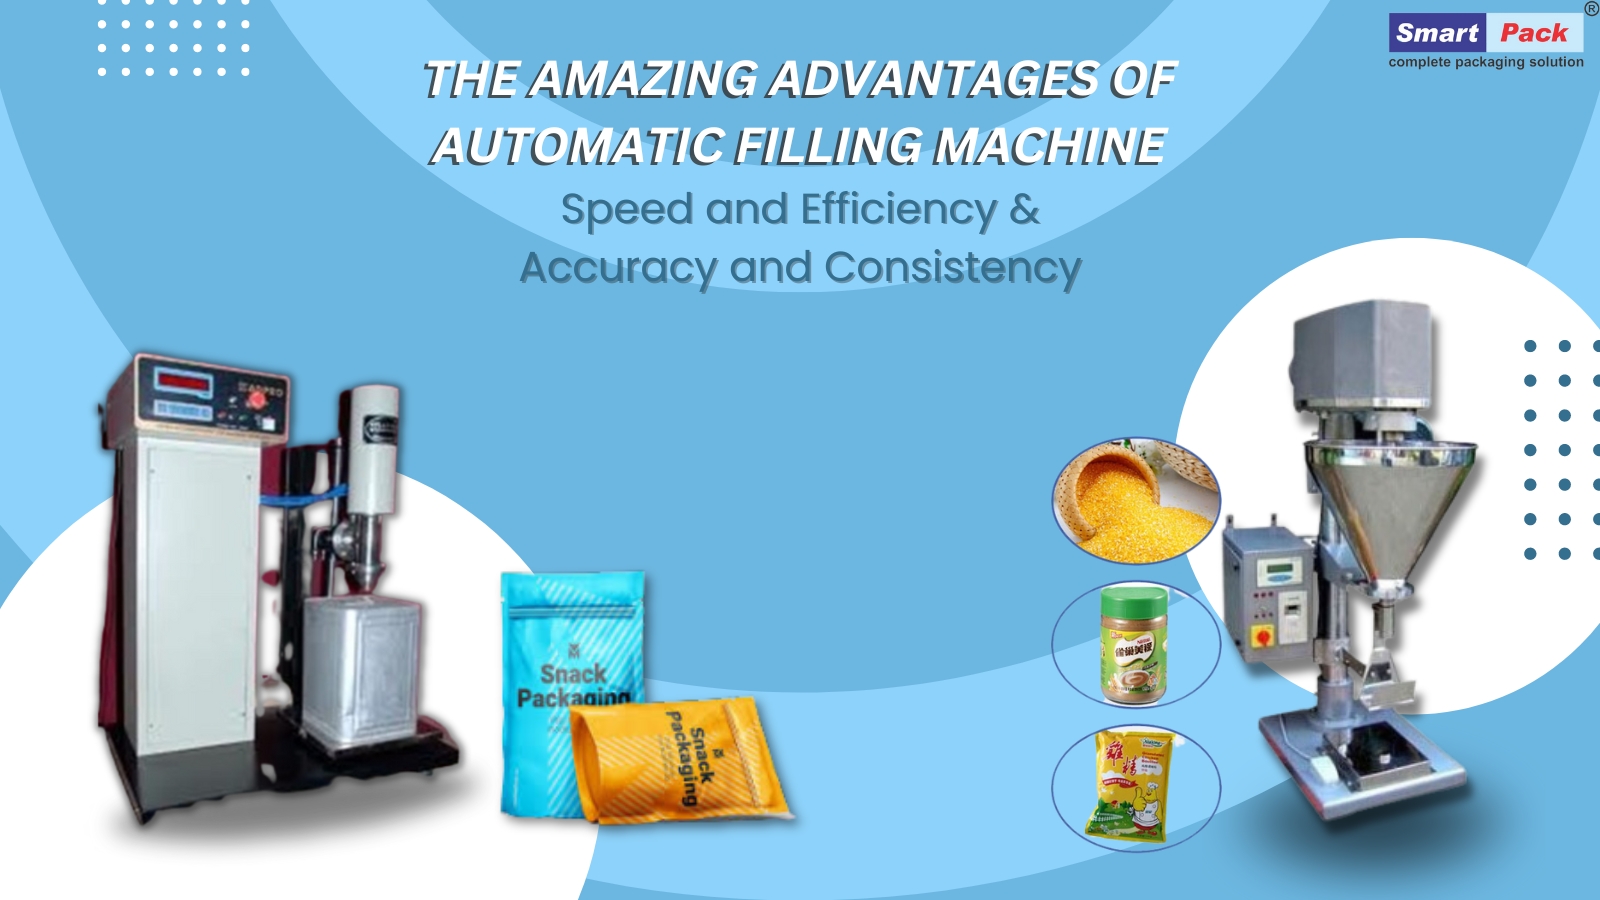 The amazing Advantages of Automatic Filling Machines